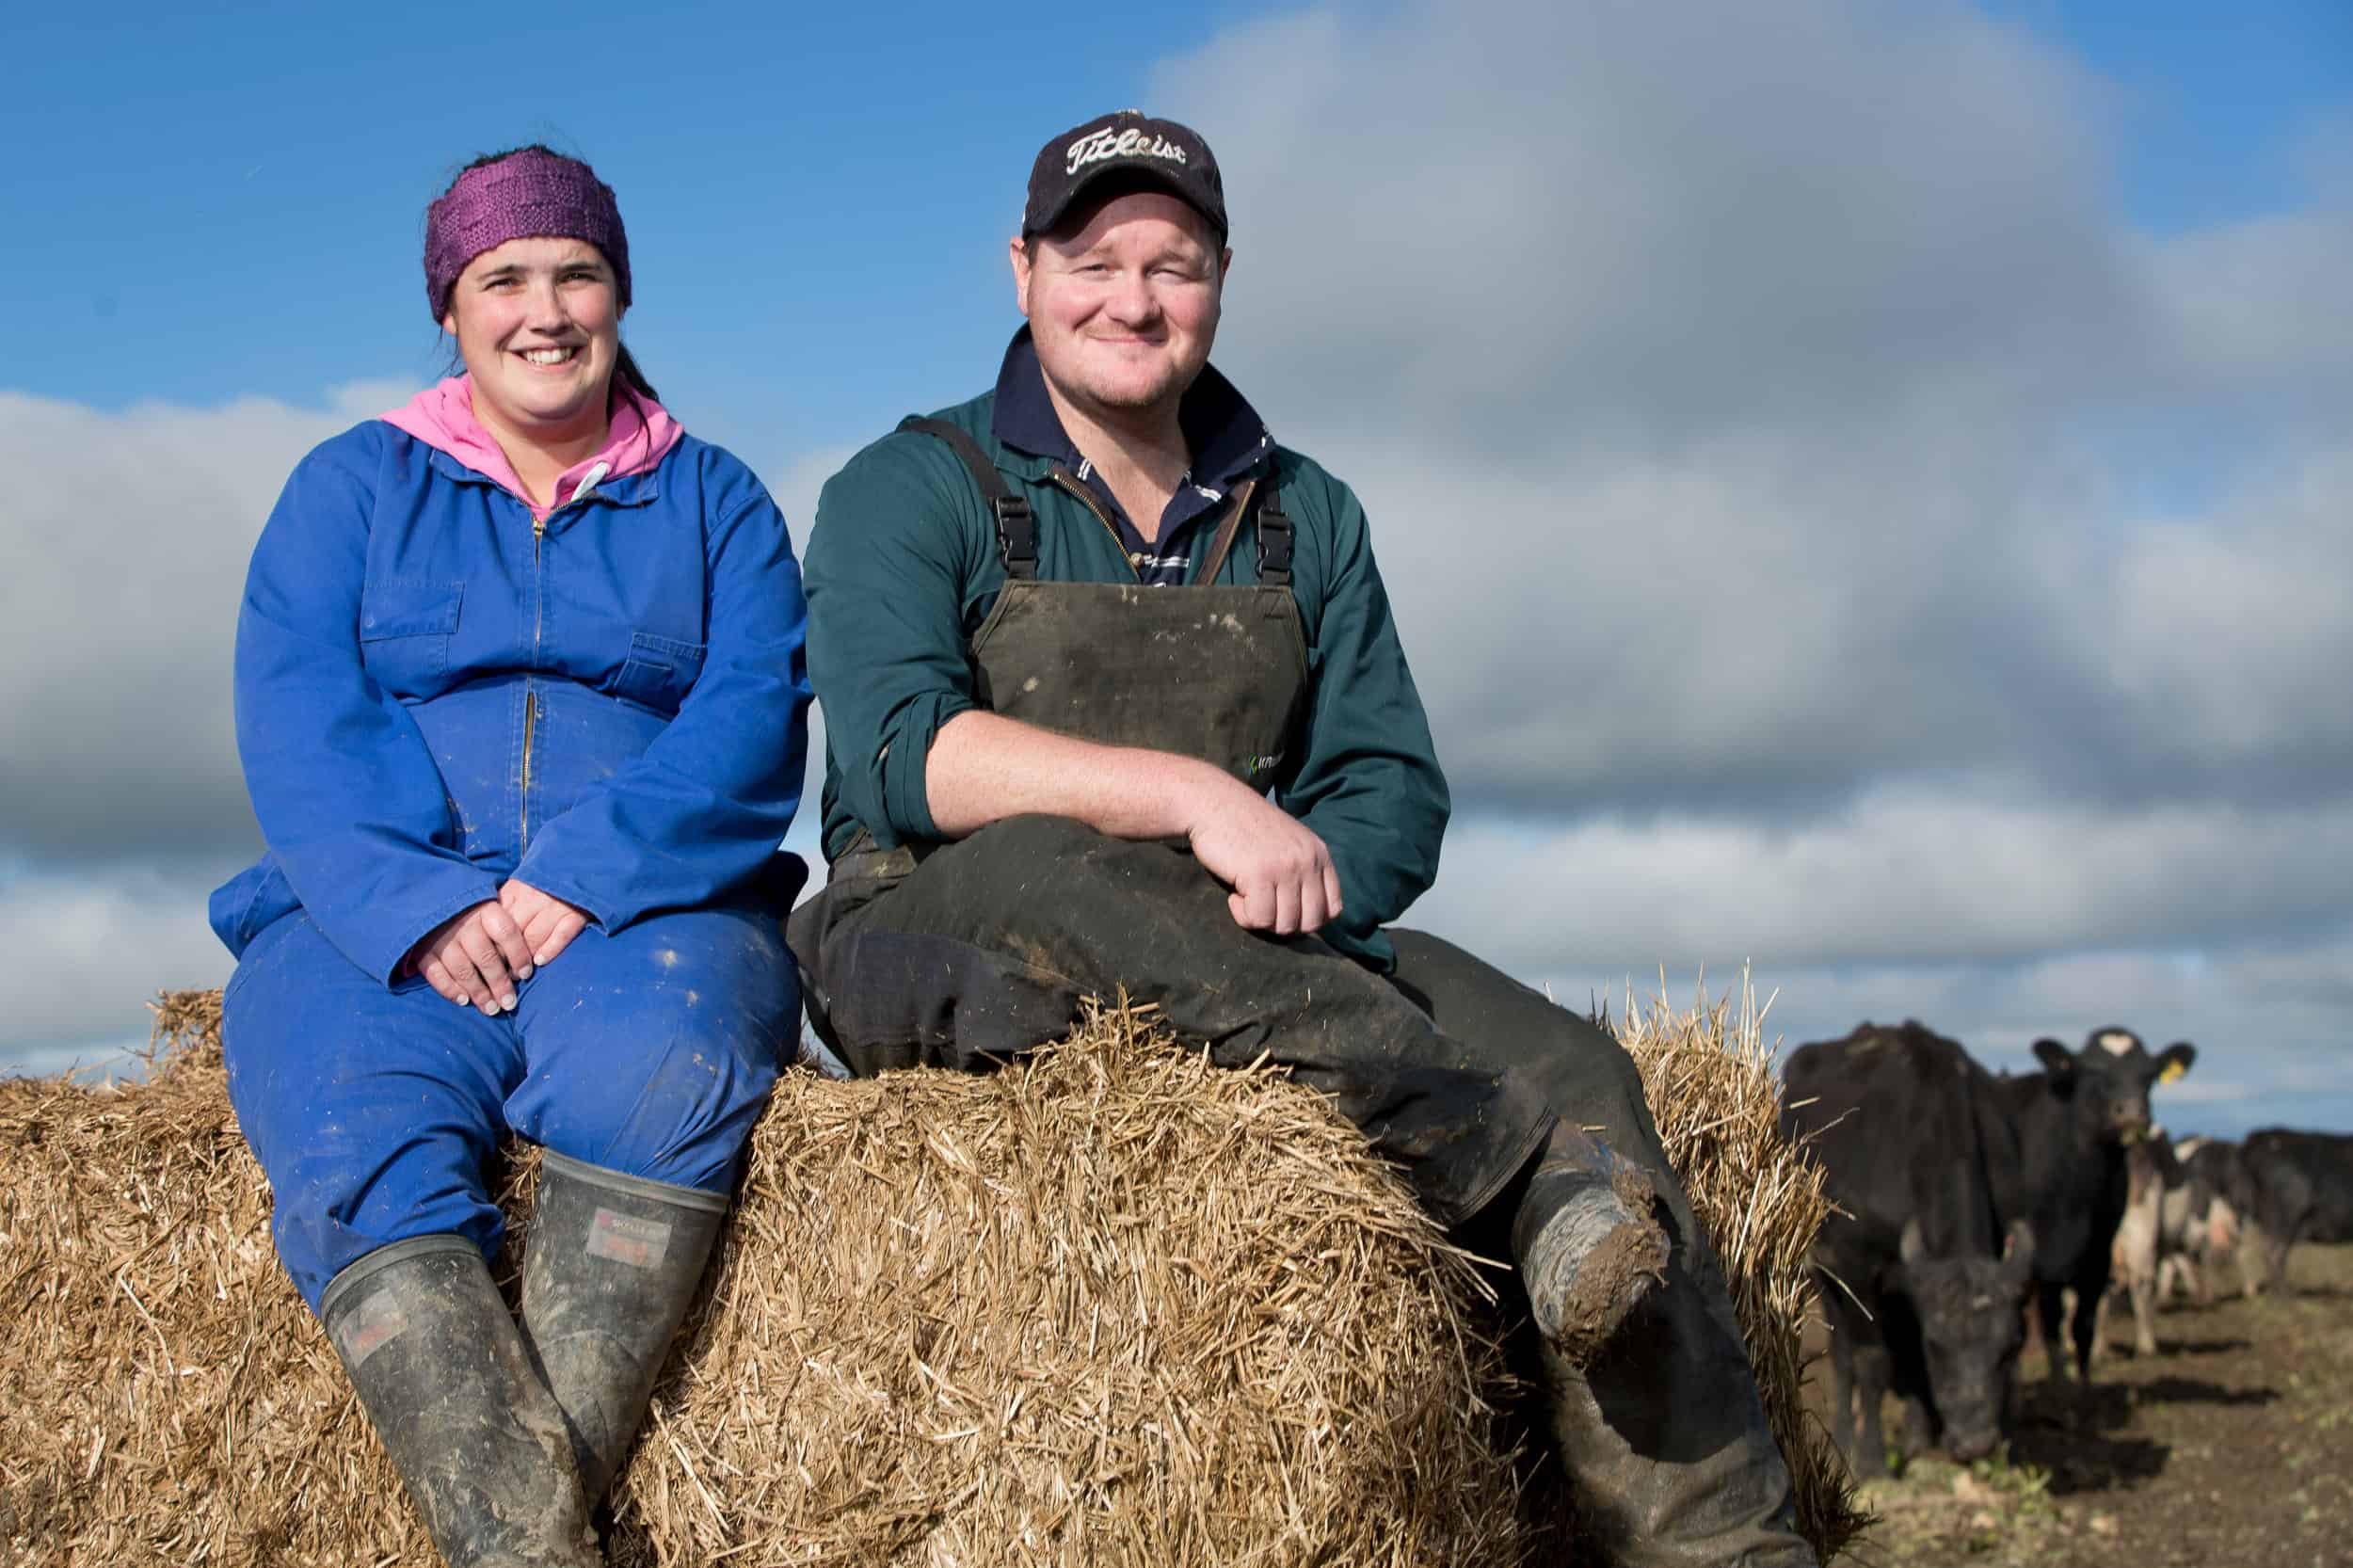 Dairy farming couple sit on haybales with cows behind.